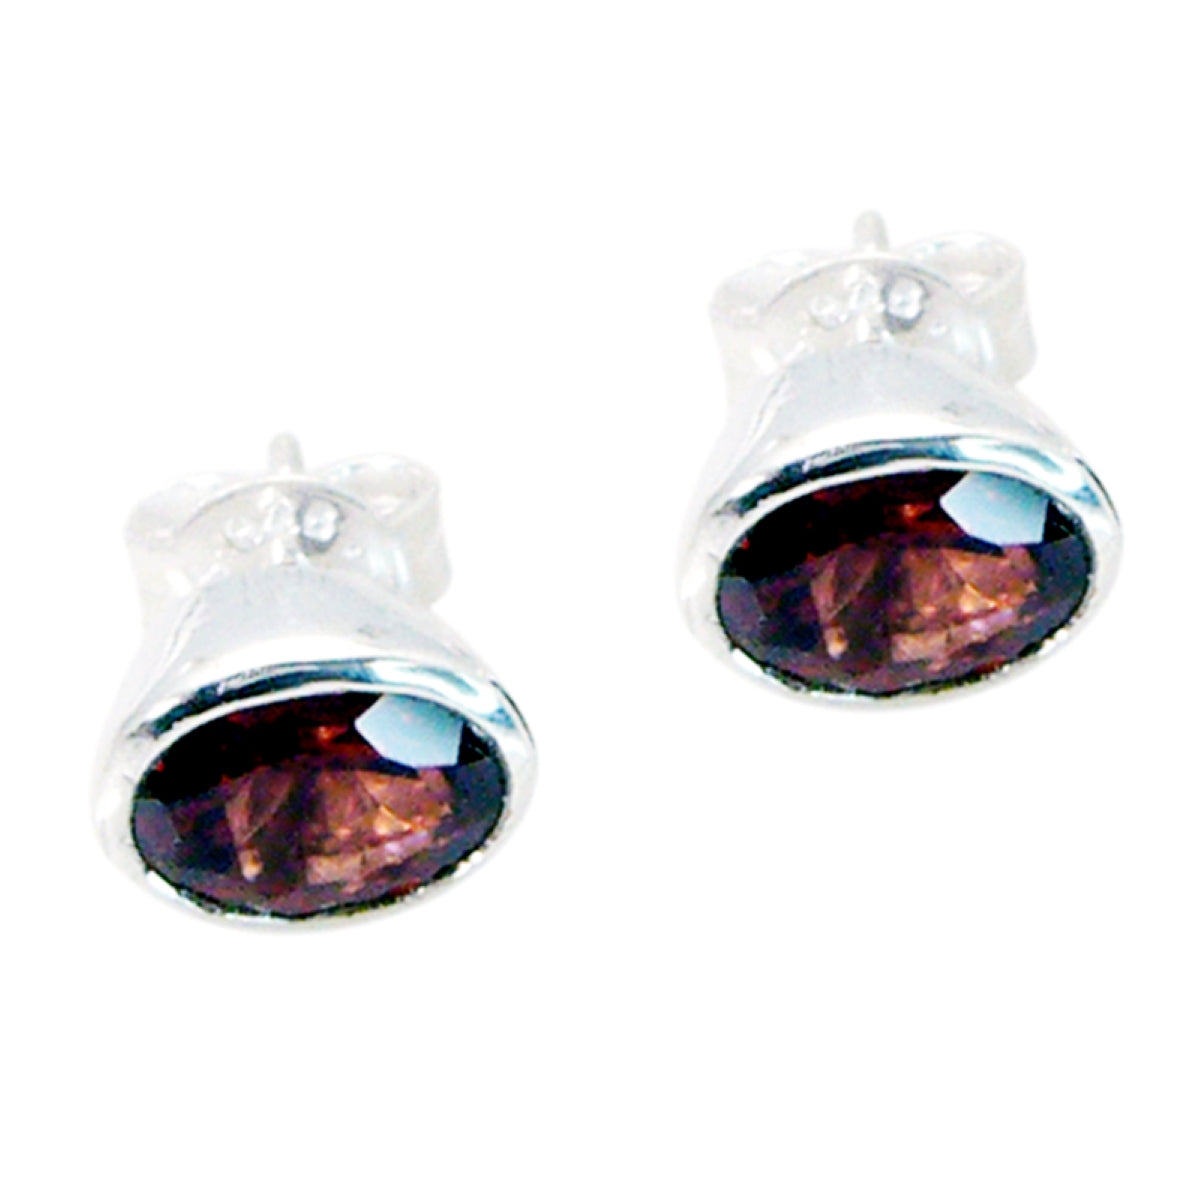 Riyo Good Gemstones oval Faceted Red Garnet Silver Earring gift for Faishonable day